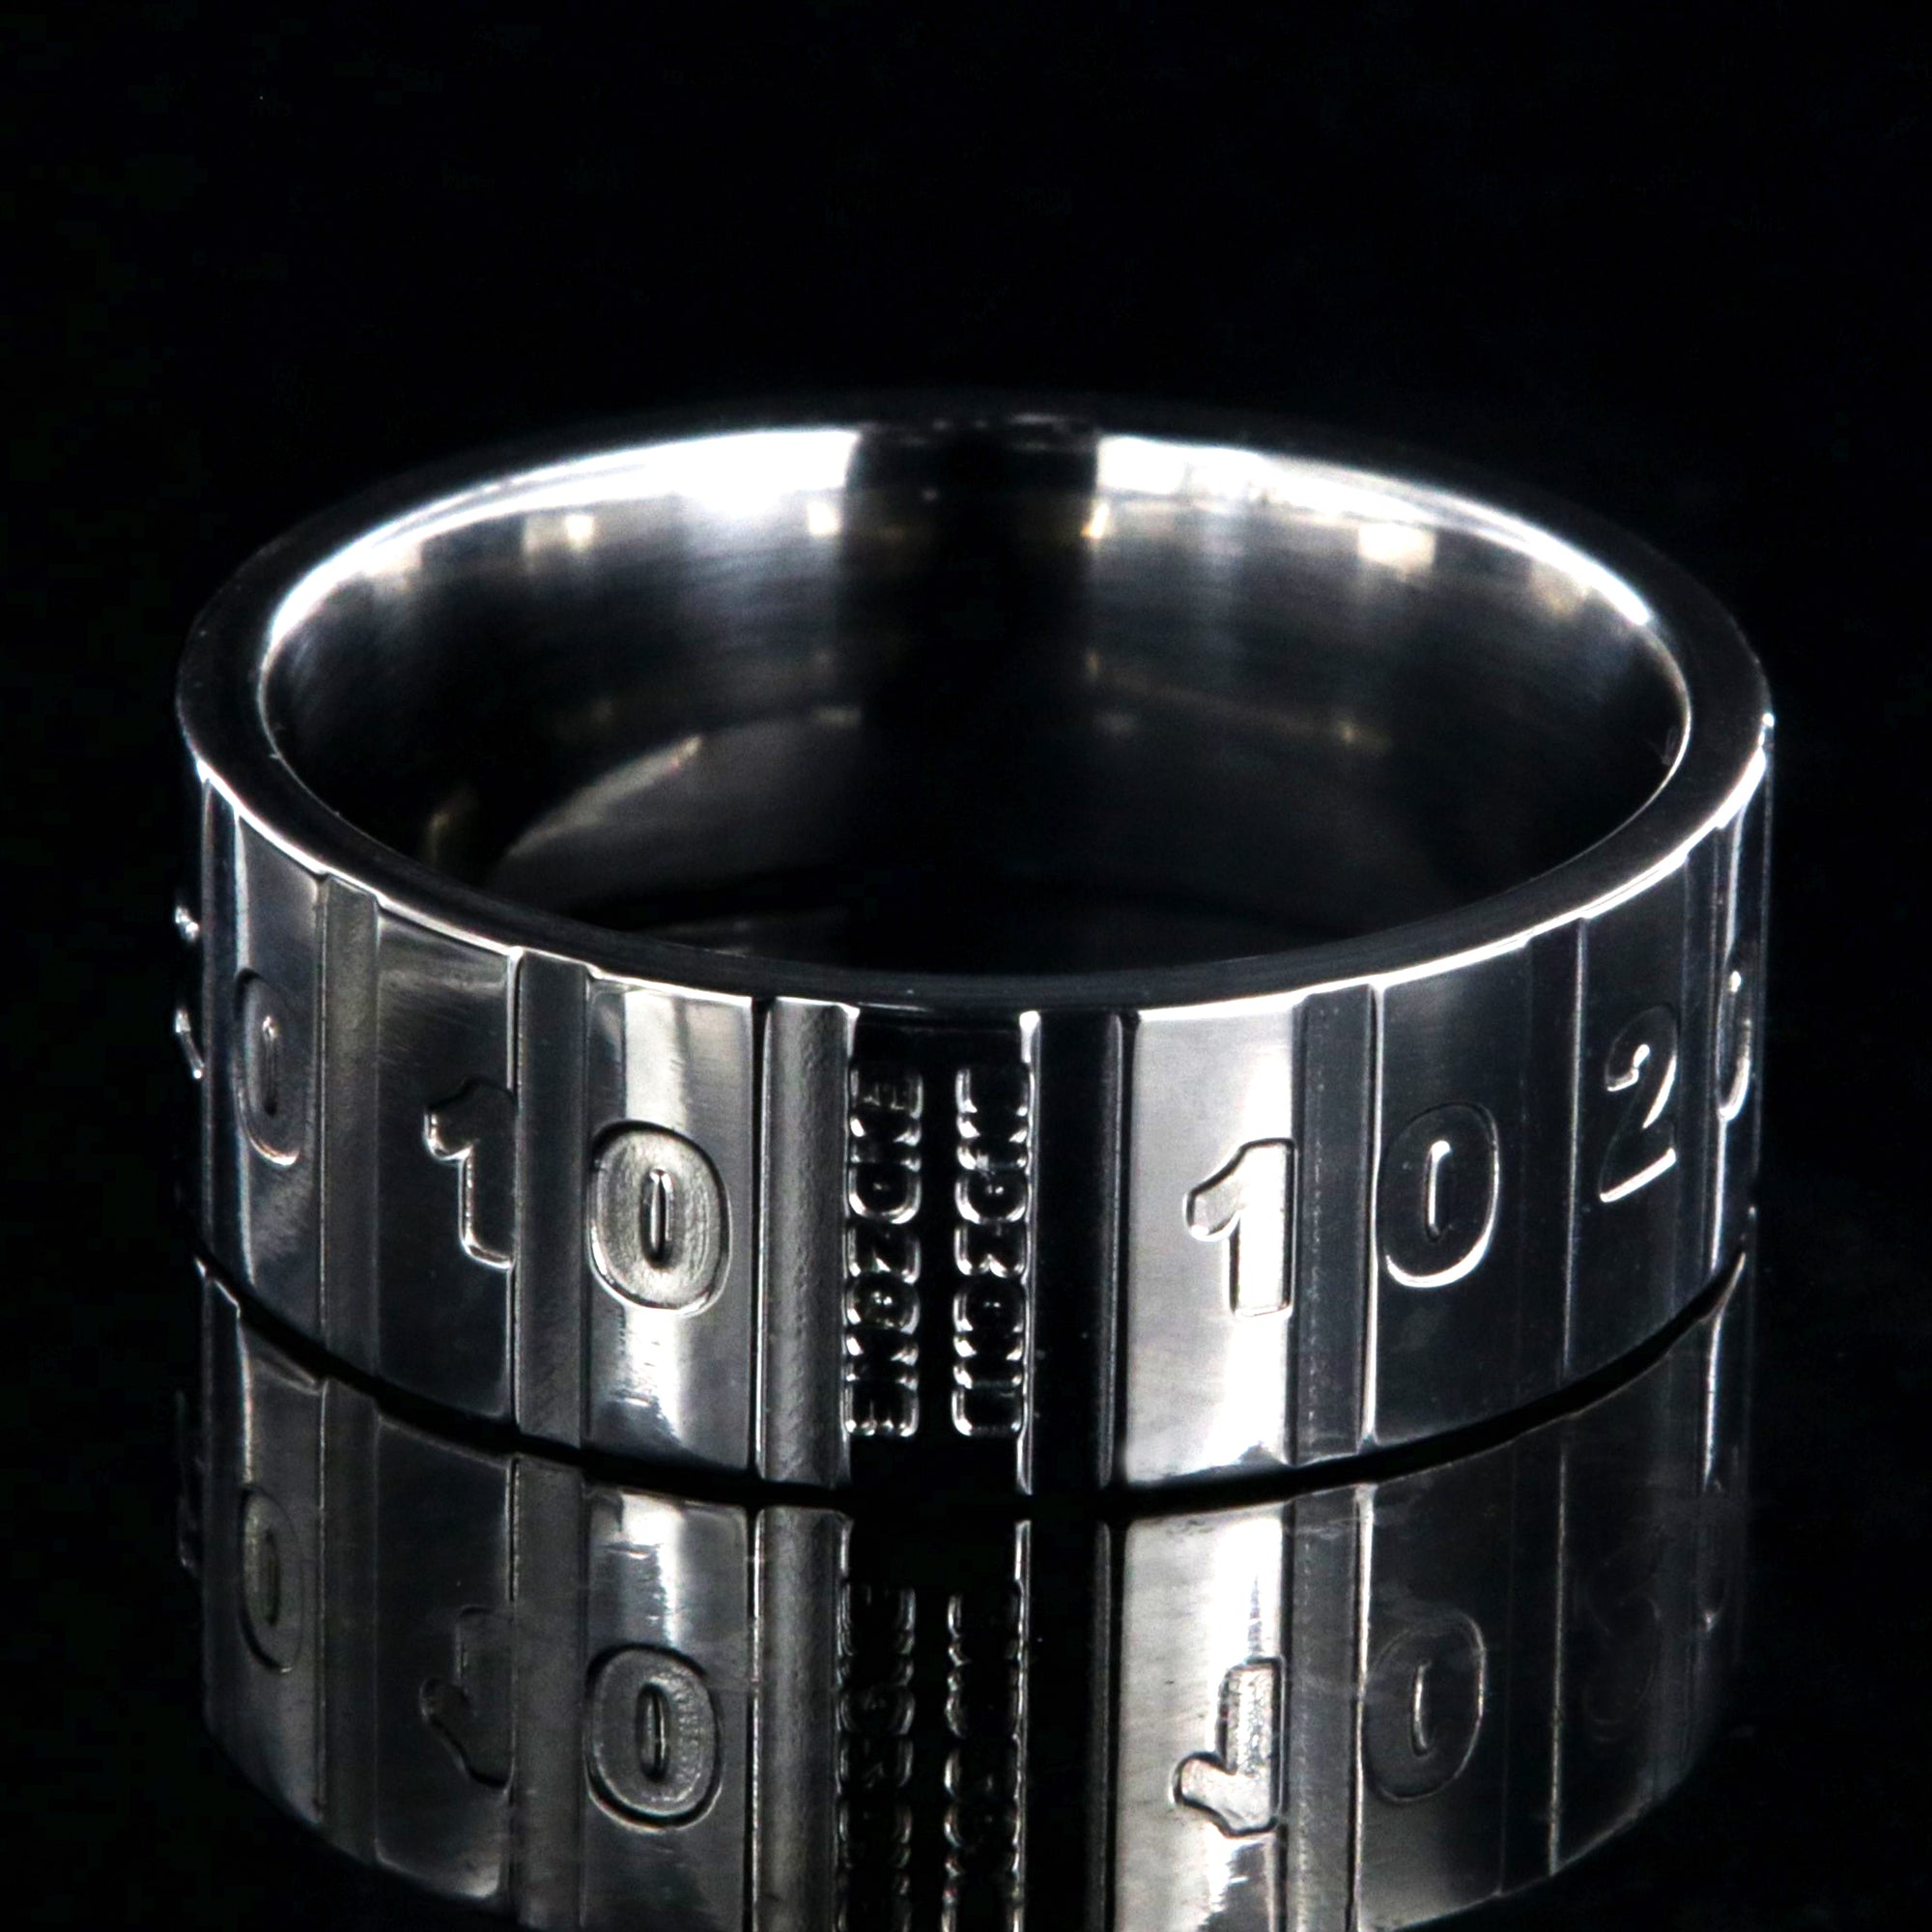 8mm wide titanium football ring with milled yardage